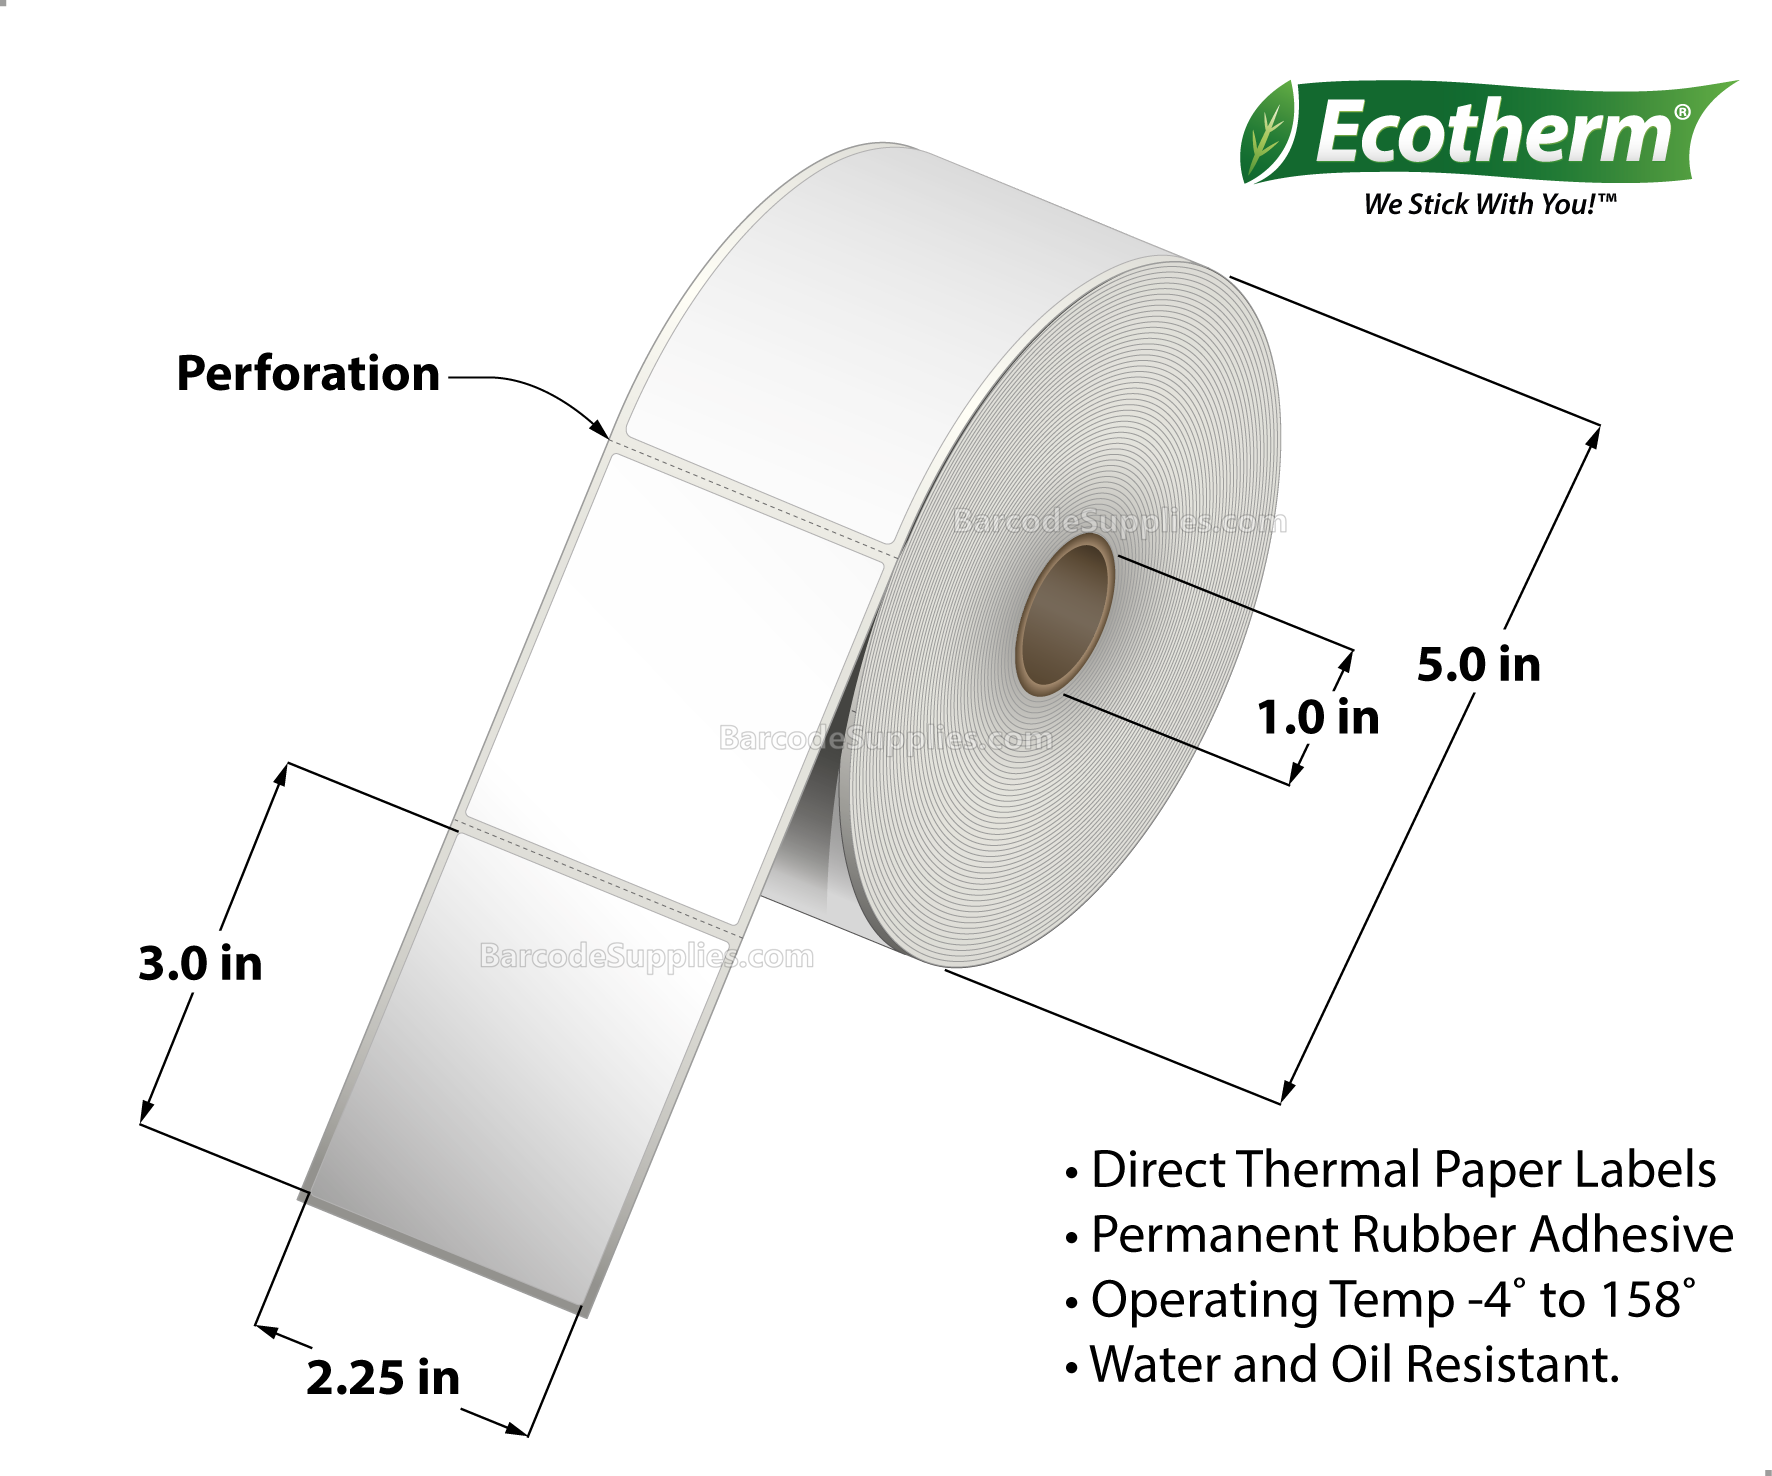 2.25 x 3 Direct Thermal White Labels With Rubber Adhesive - Perforated - 840 Labels Per Roll - Carton Of 6 Rolls - 5040 Labels Total - MPN: ECOTHERM15131-6